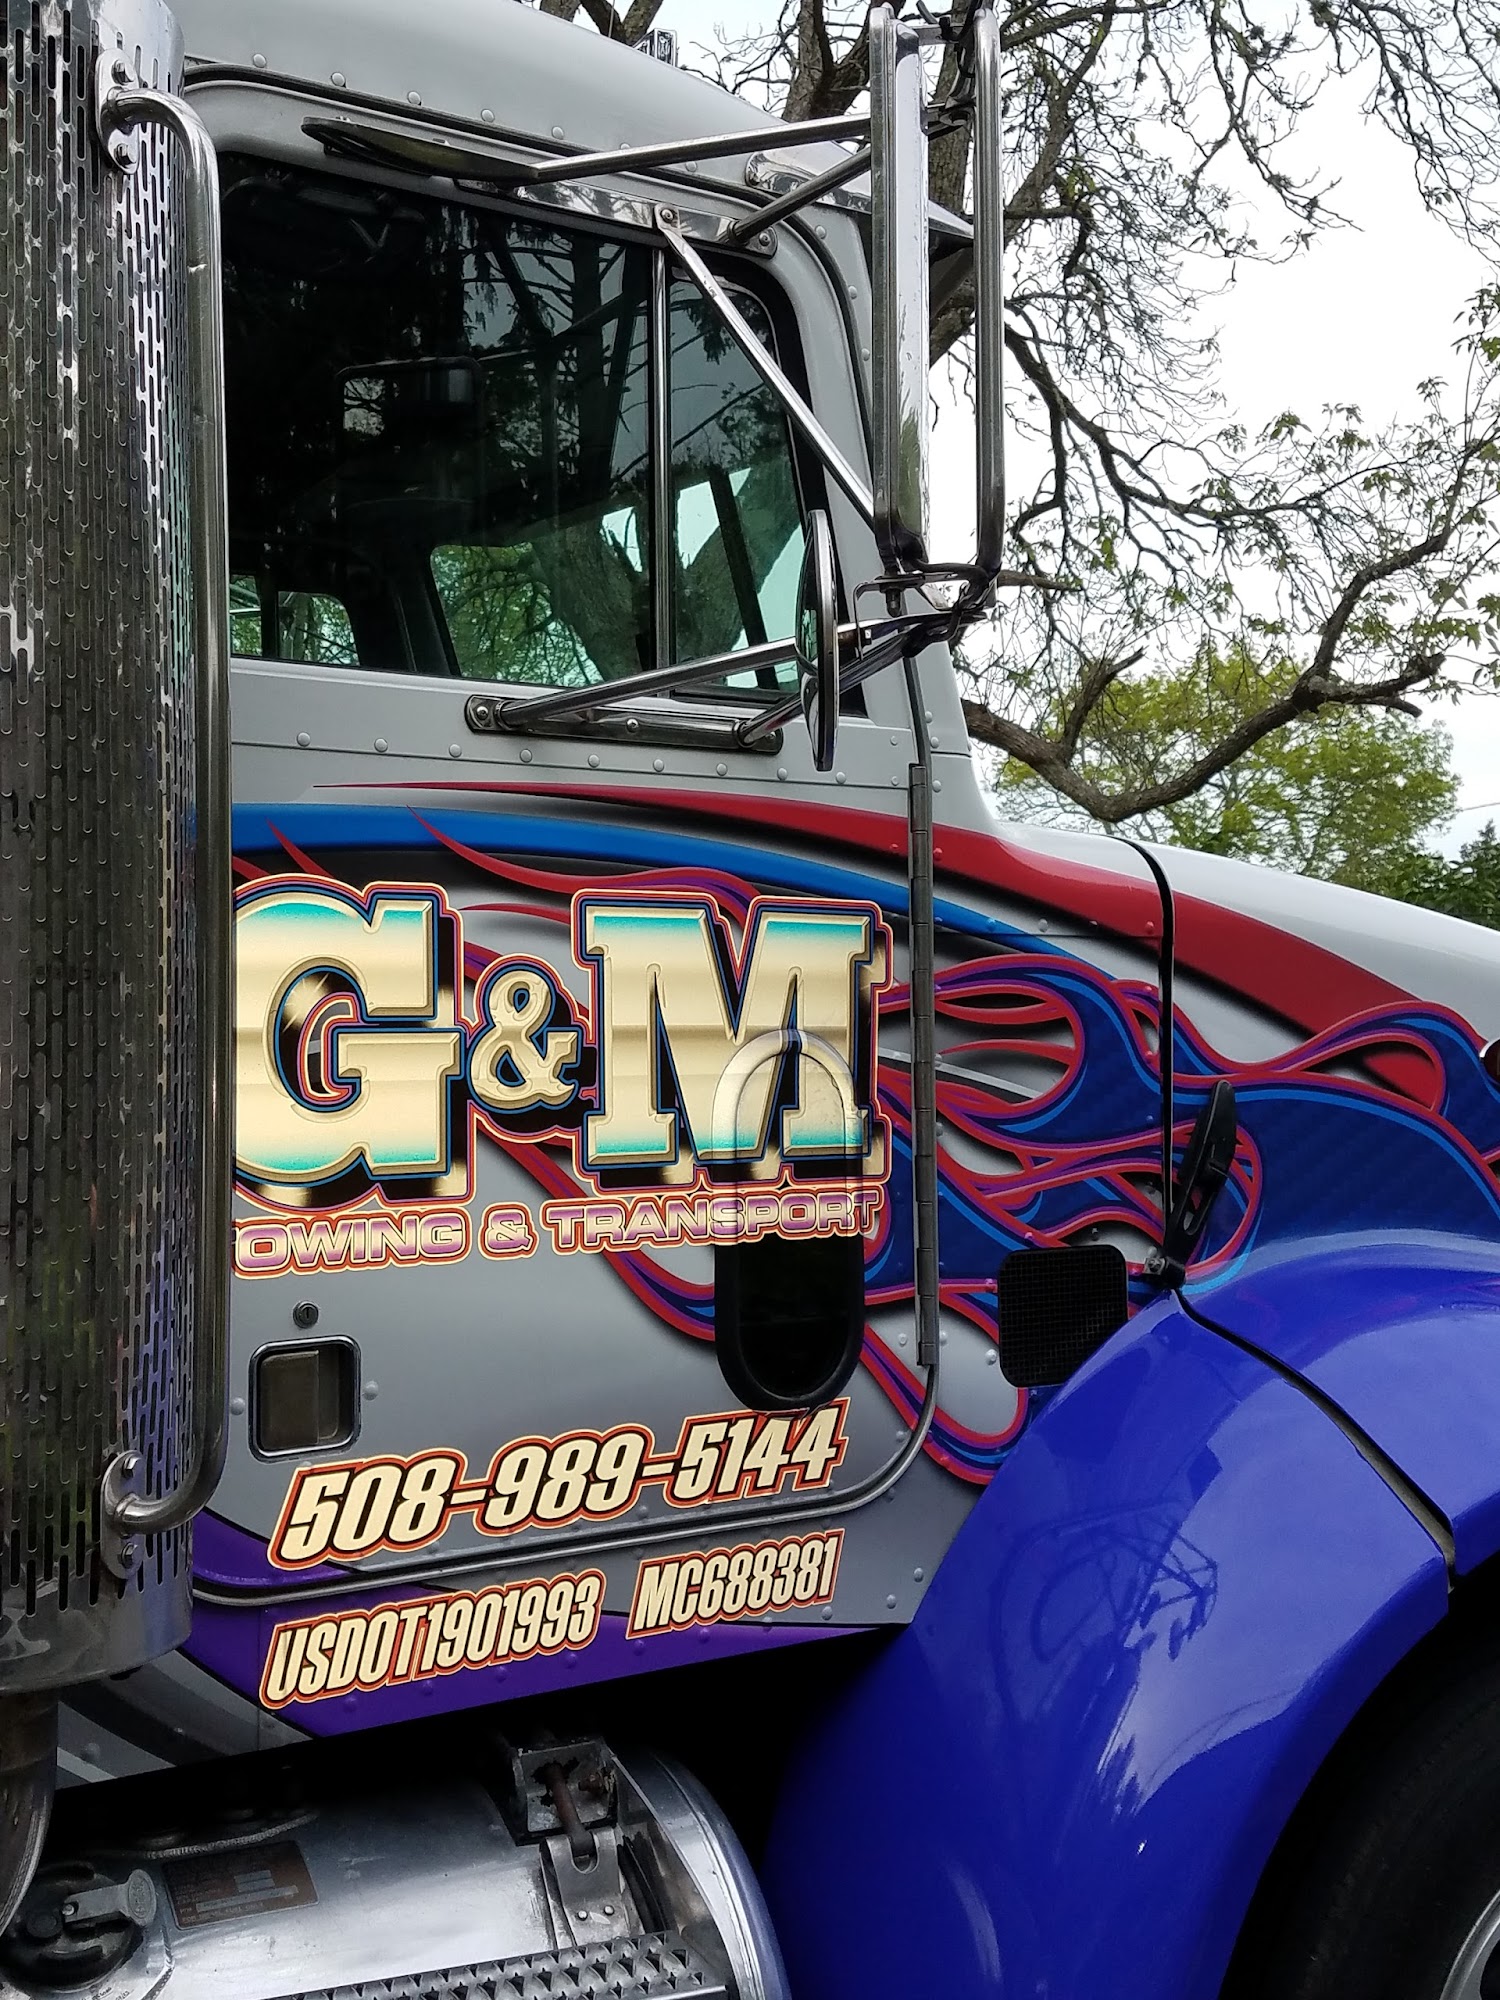 G & M Towing and Transport